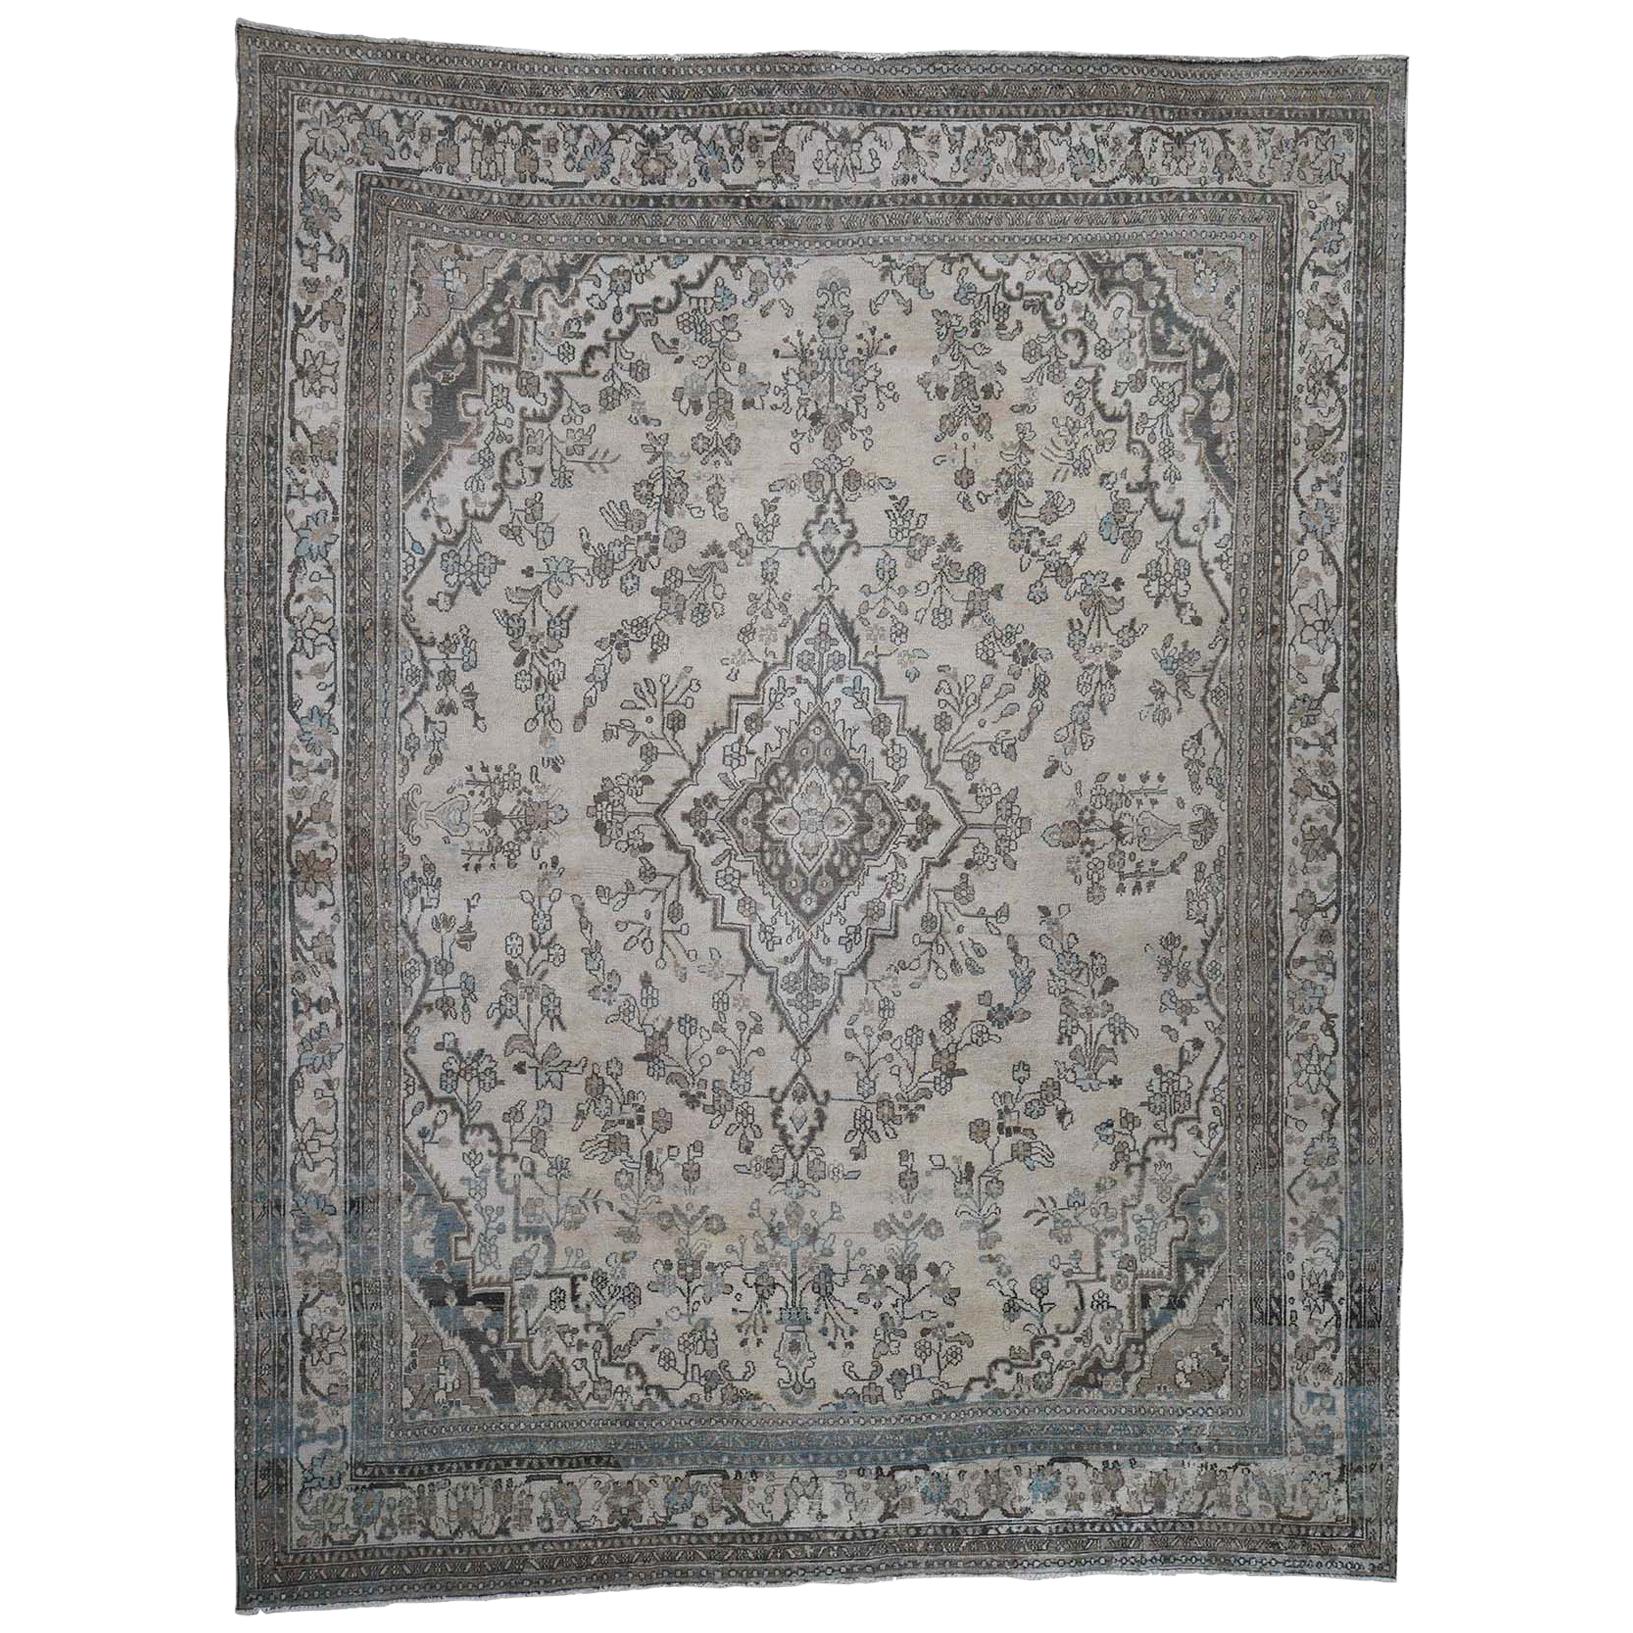 Vintage Hamadan with Grey and Blue Hand Knotted Oriental Rug